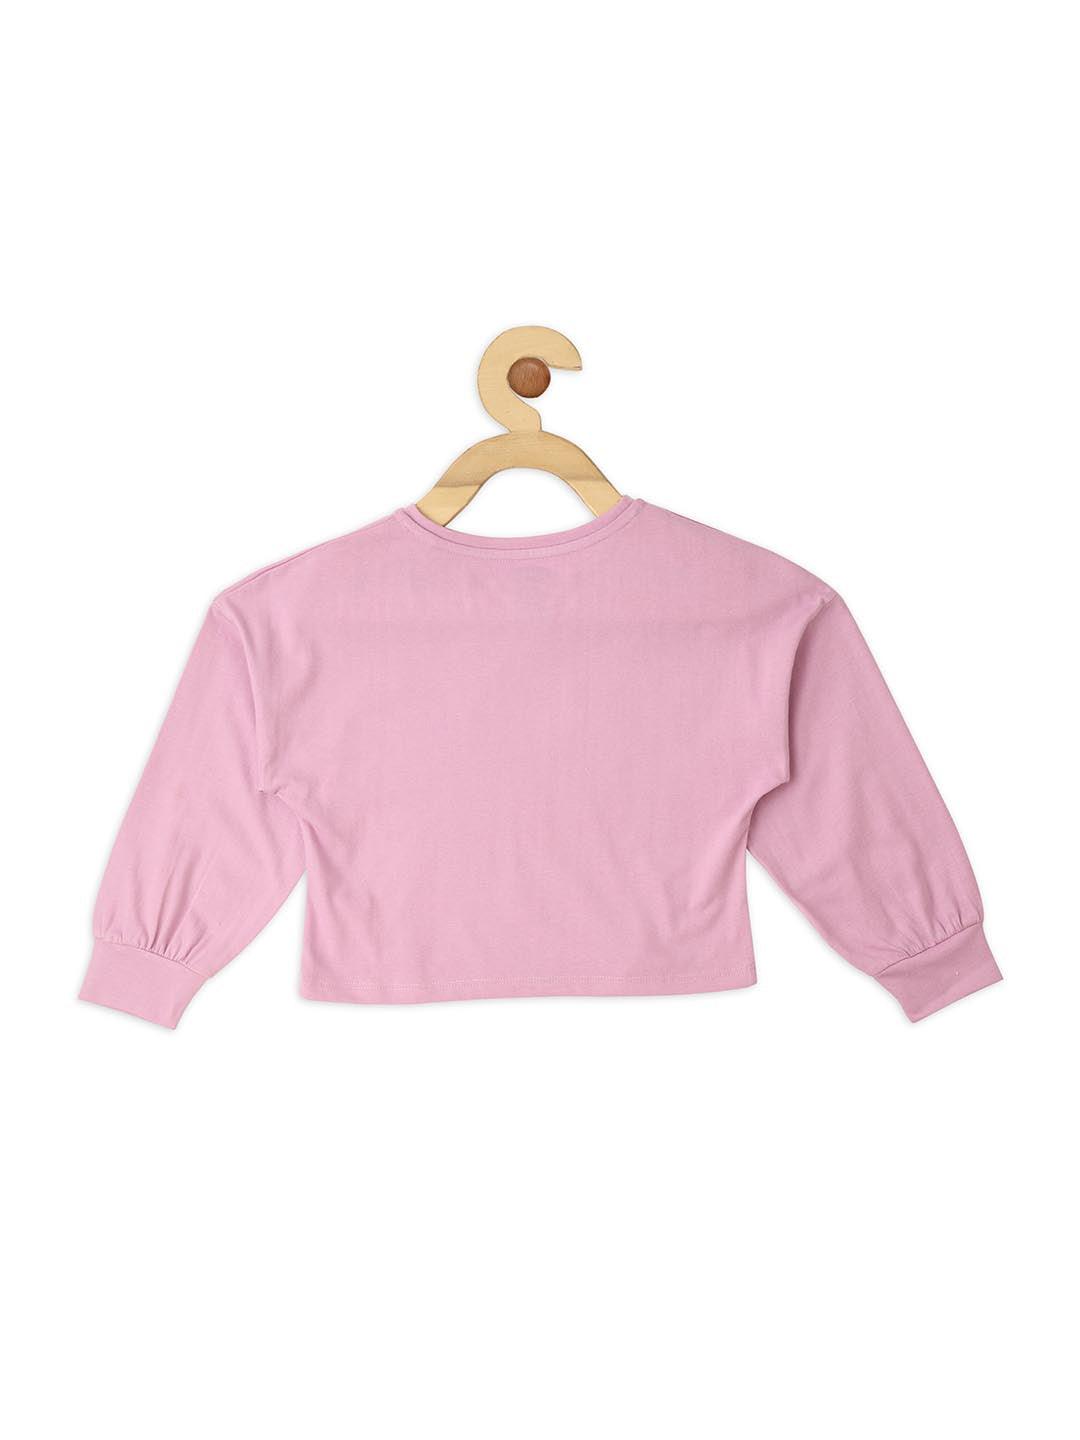 Lilac Top for Girls - Lagorii Kids